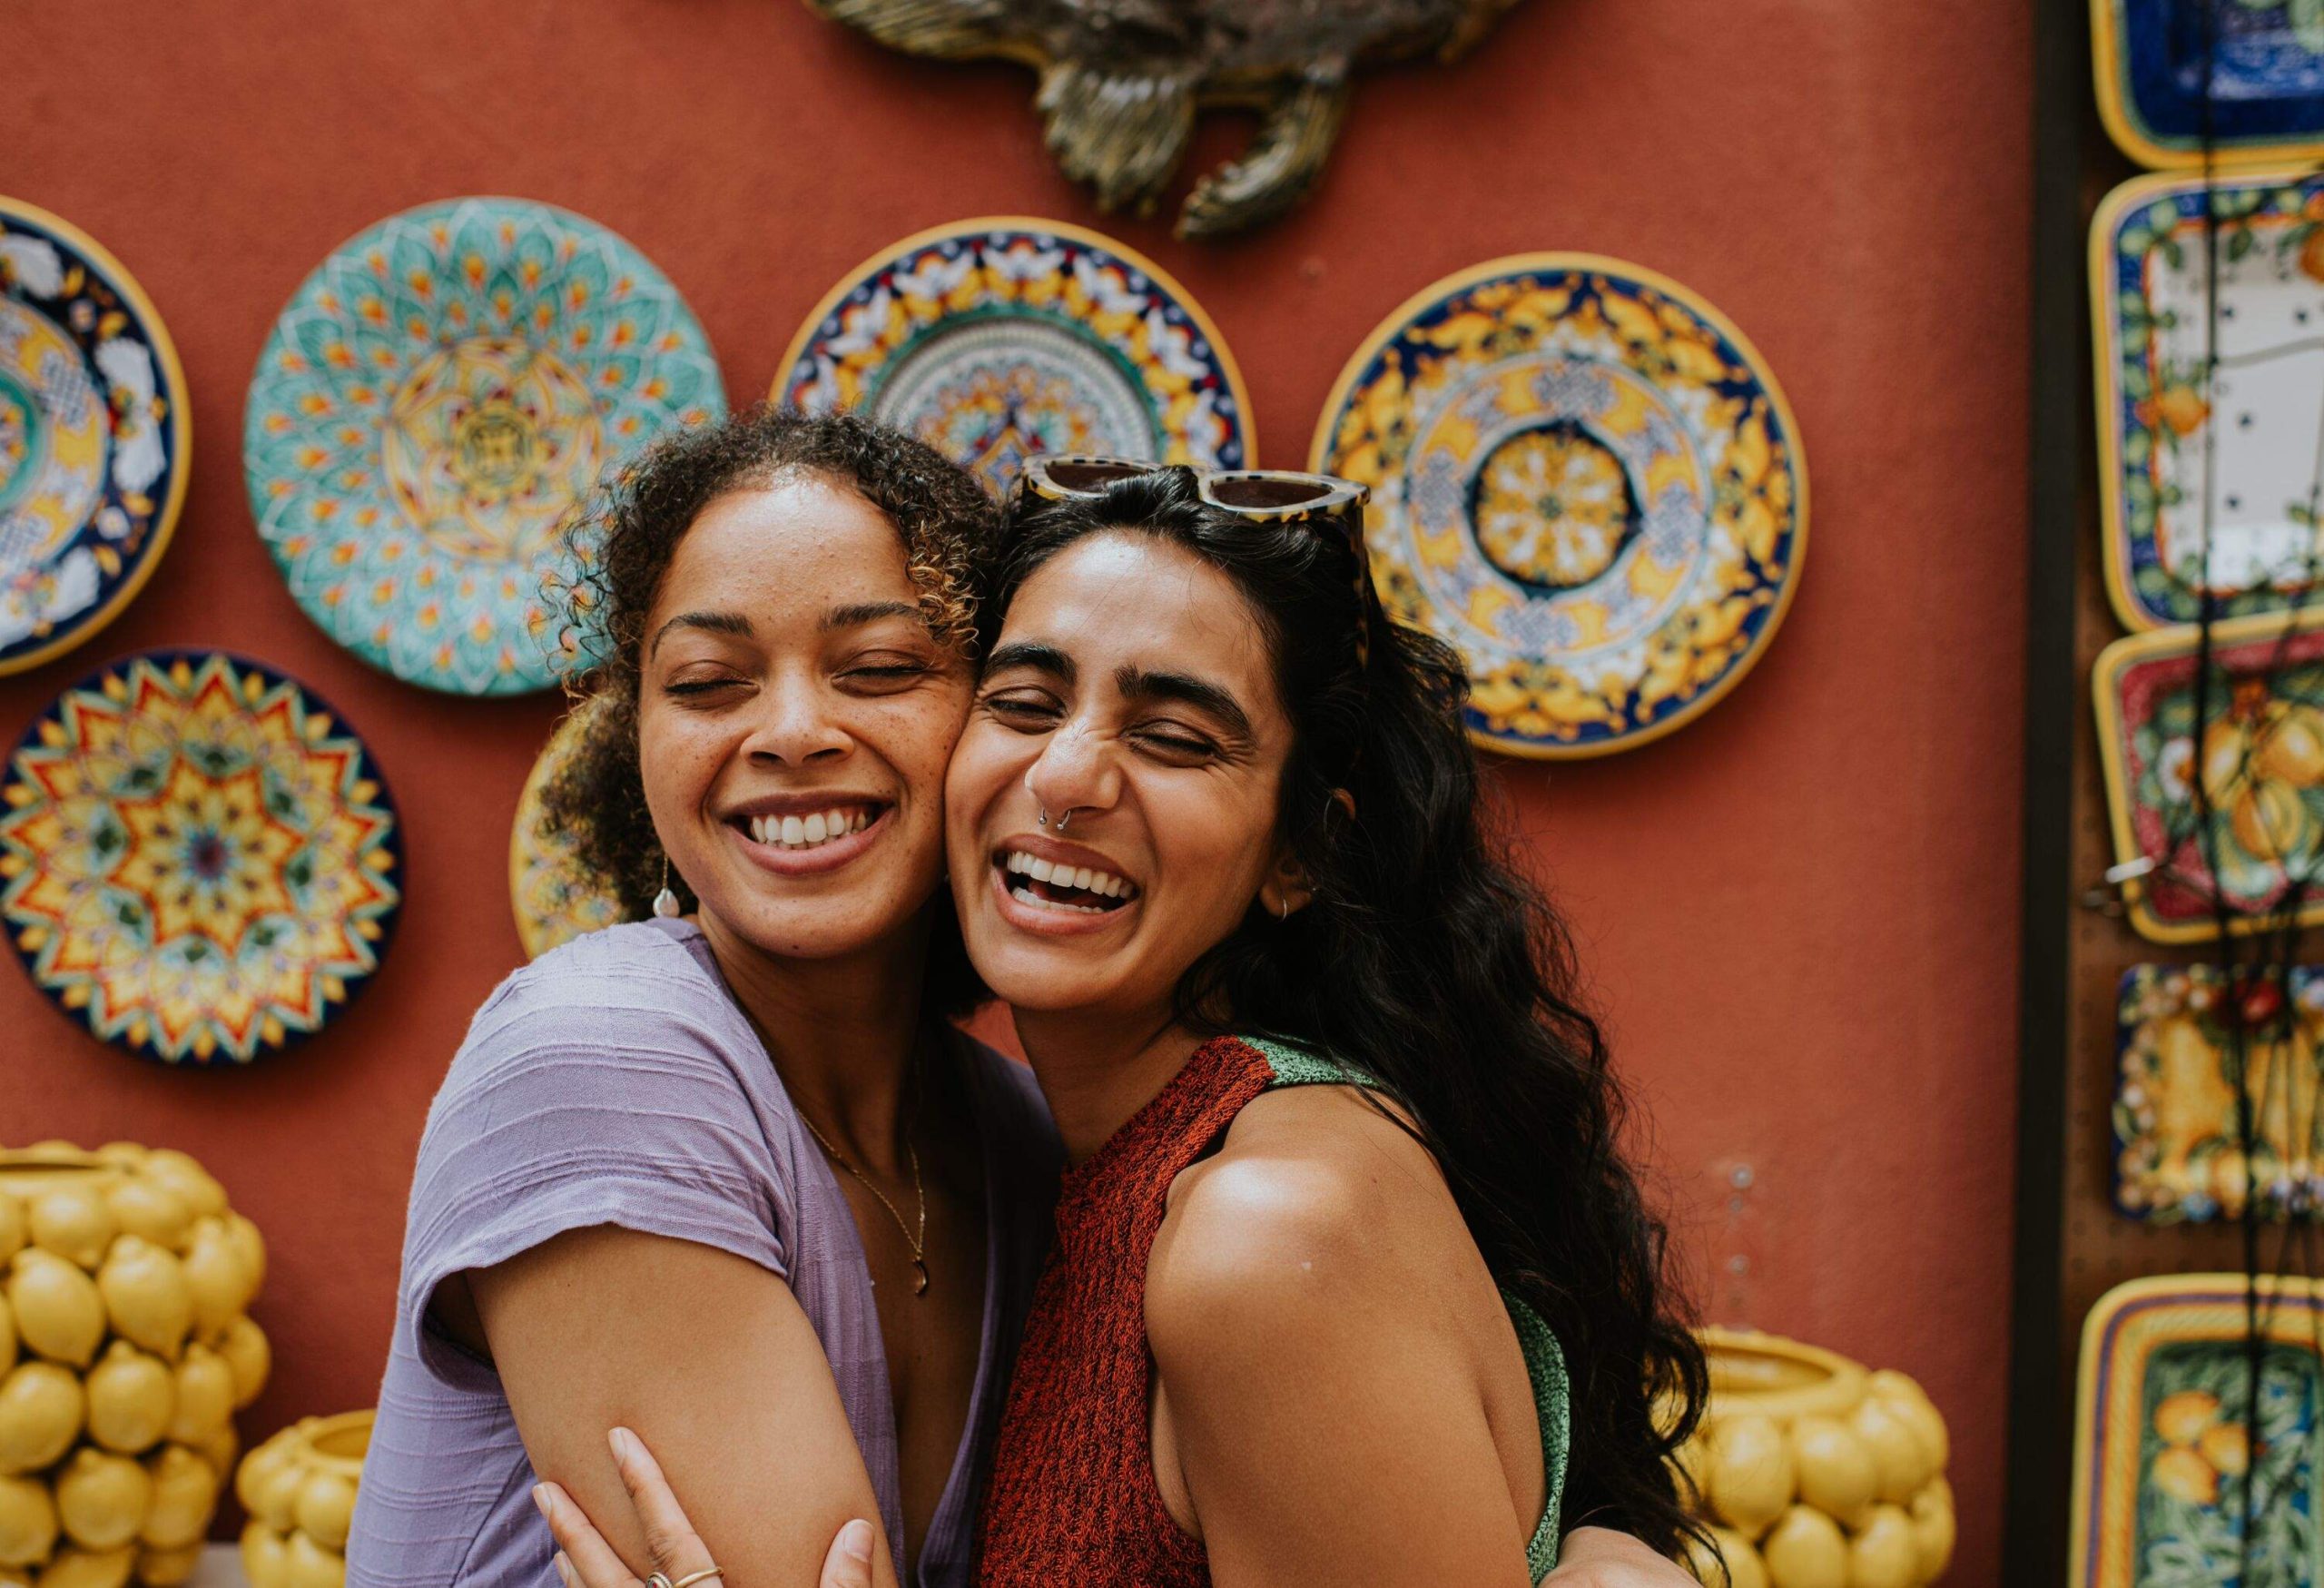 Two young female friends shop in Positano, Italy, famous for its colourful ceramics. They pose together outside a red wall, with wall mounted plates and vases. The woman affectionately embrace as they smile confidently at the camera.